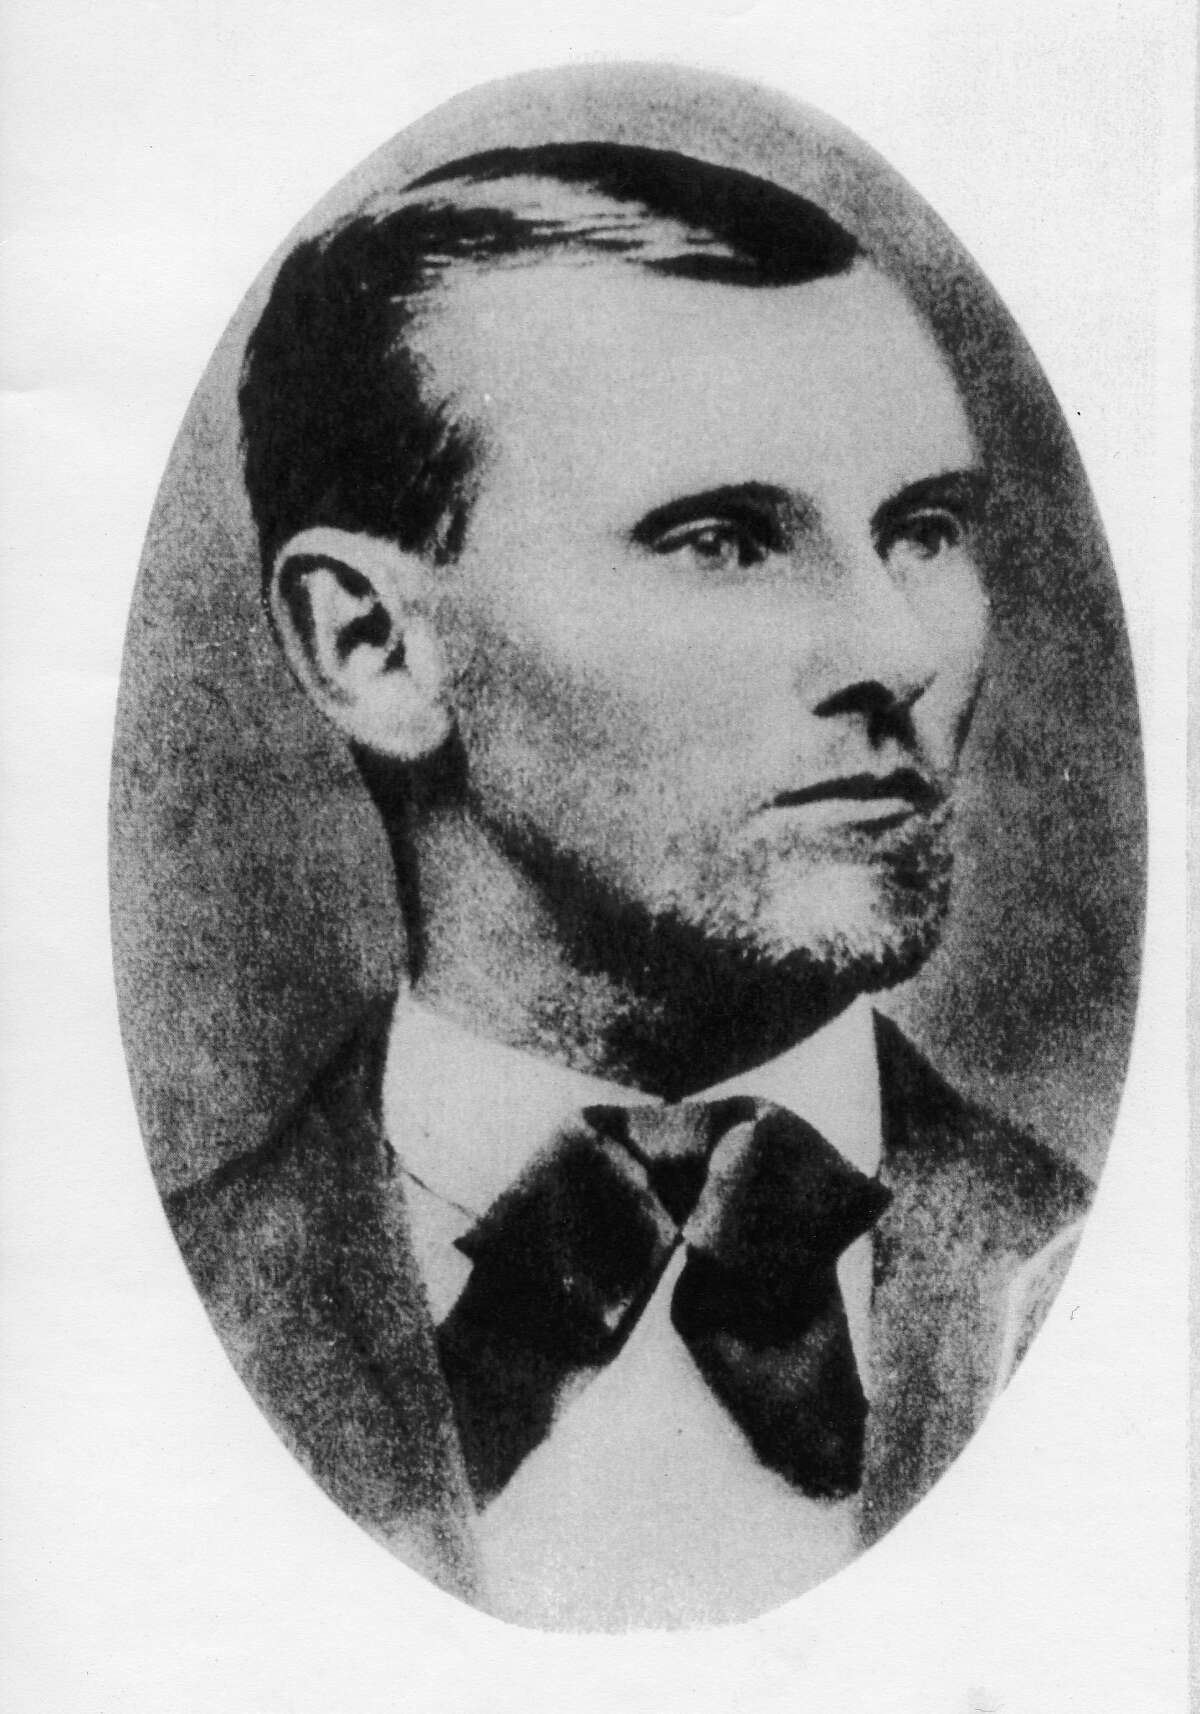 Lost photo of Jesse James, assassin Robert Ford is found, authenticated